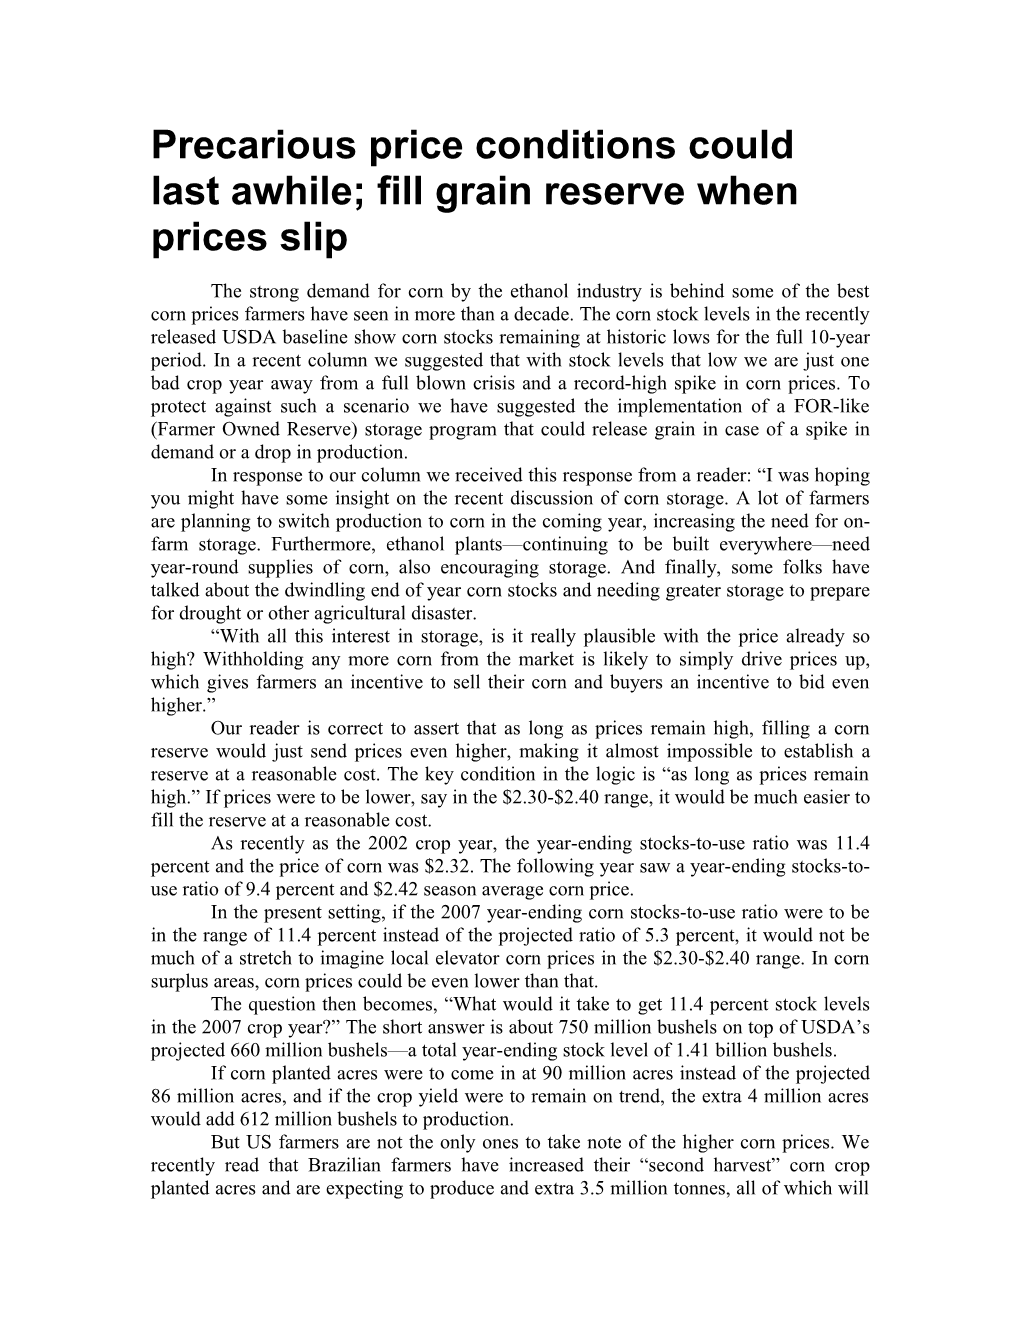 Pecarious Price Conditions Could Last Awhile; Fill Grain Reserve When Prices Slip